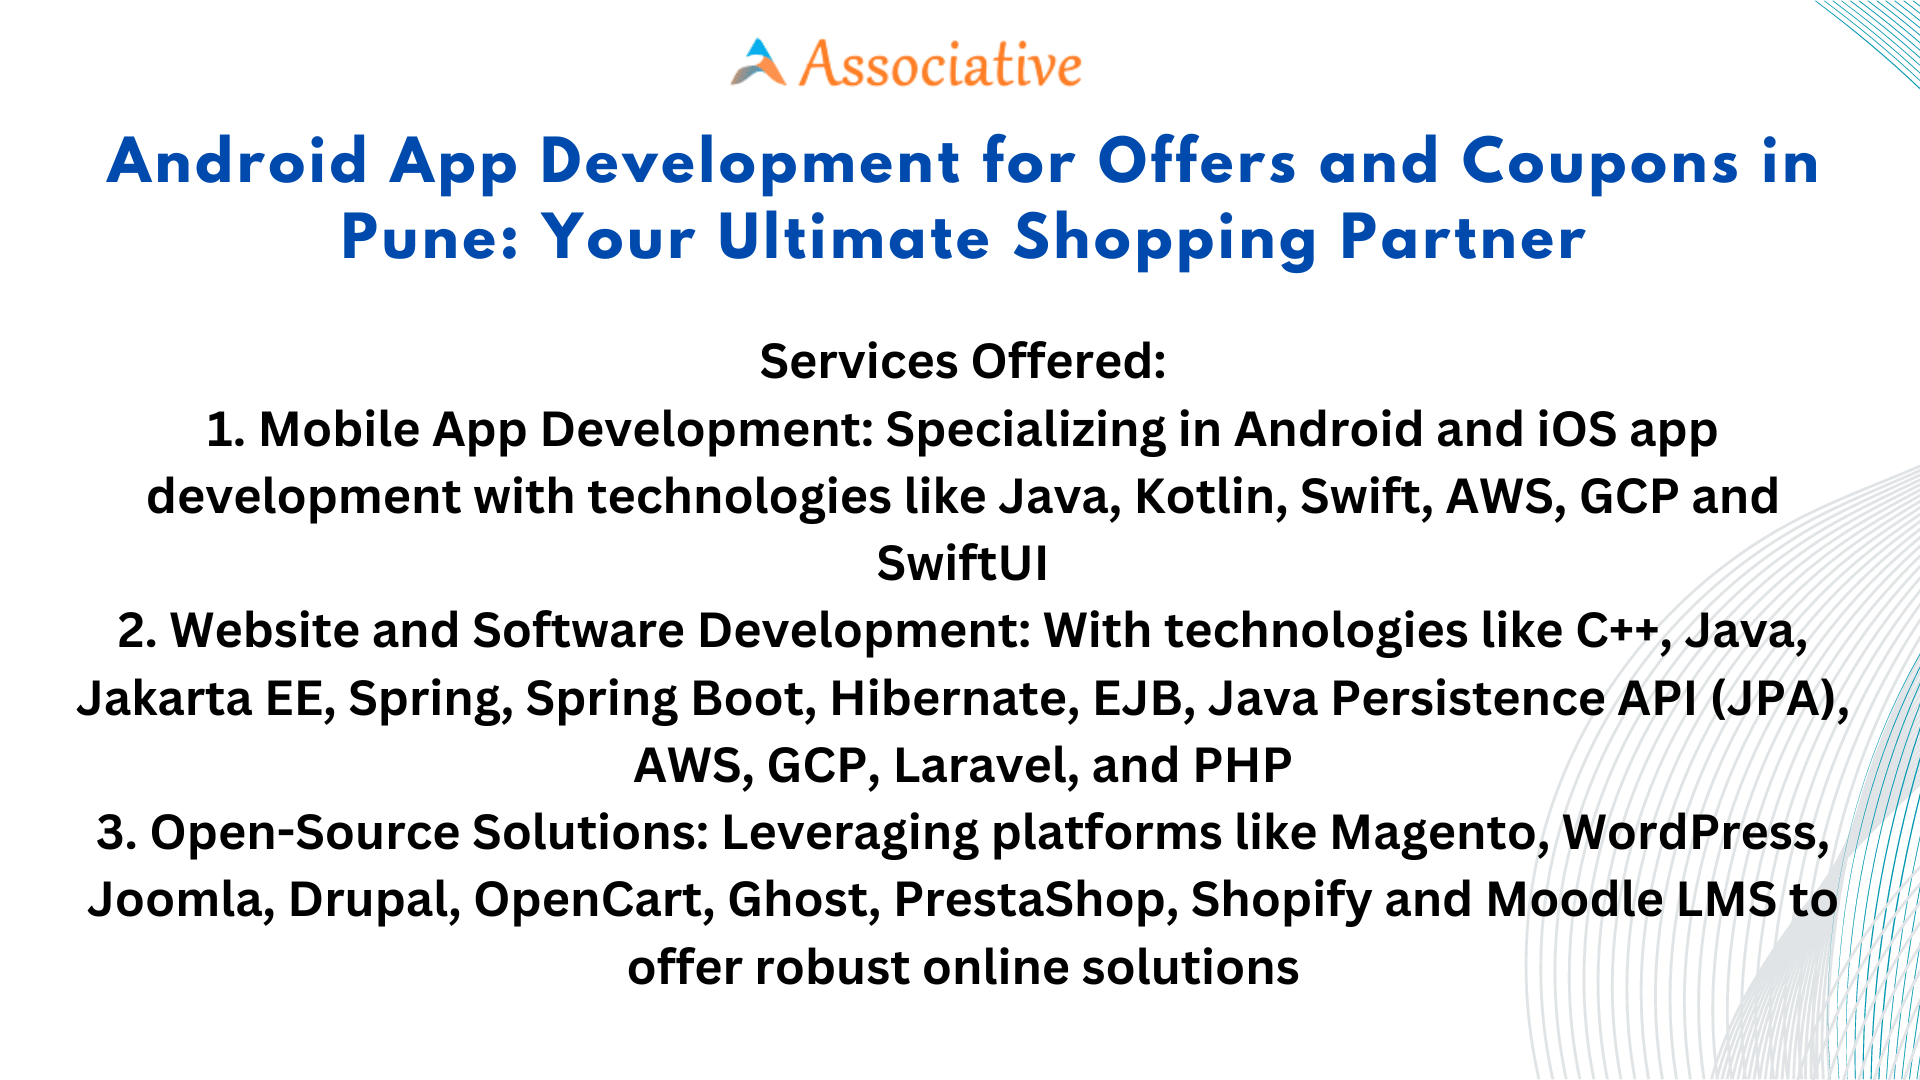 Android App Development for Offers and Coupons in Pune Your Ultimate Shopping Partner